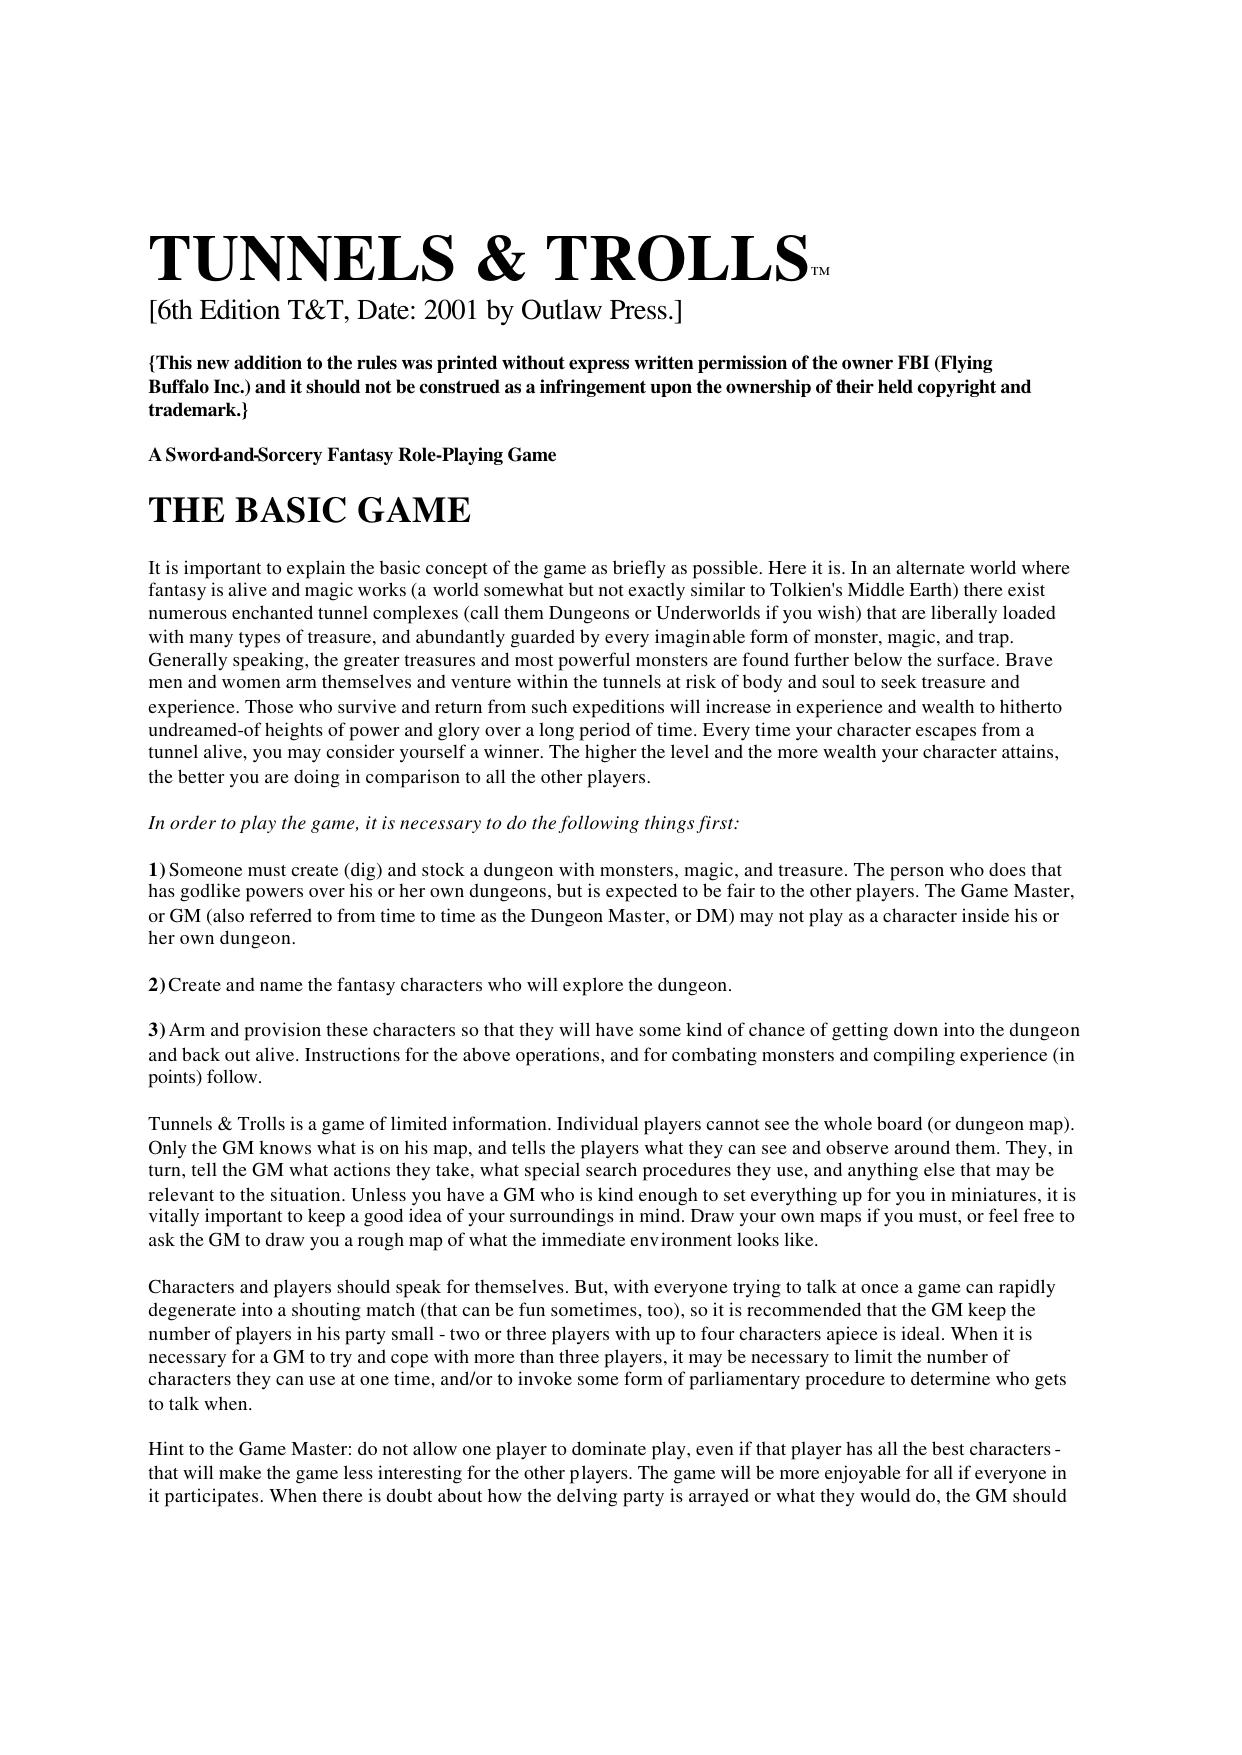 tunnels and trolls 6th edition rules.doc